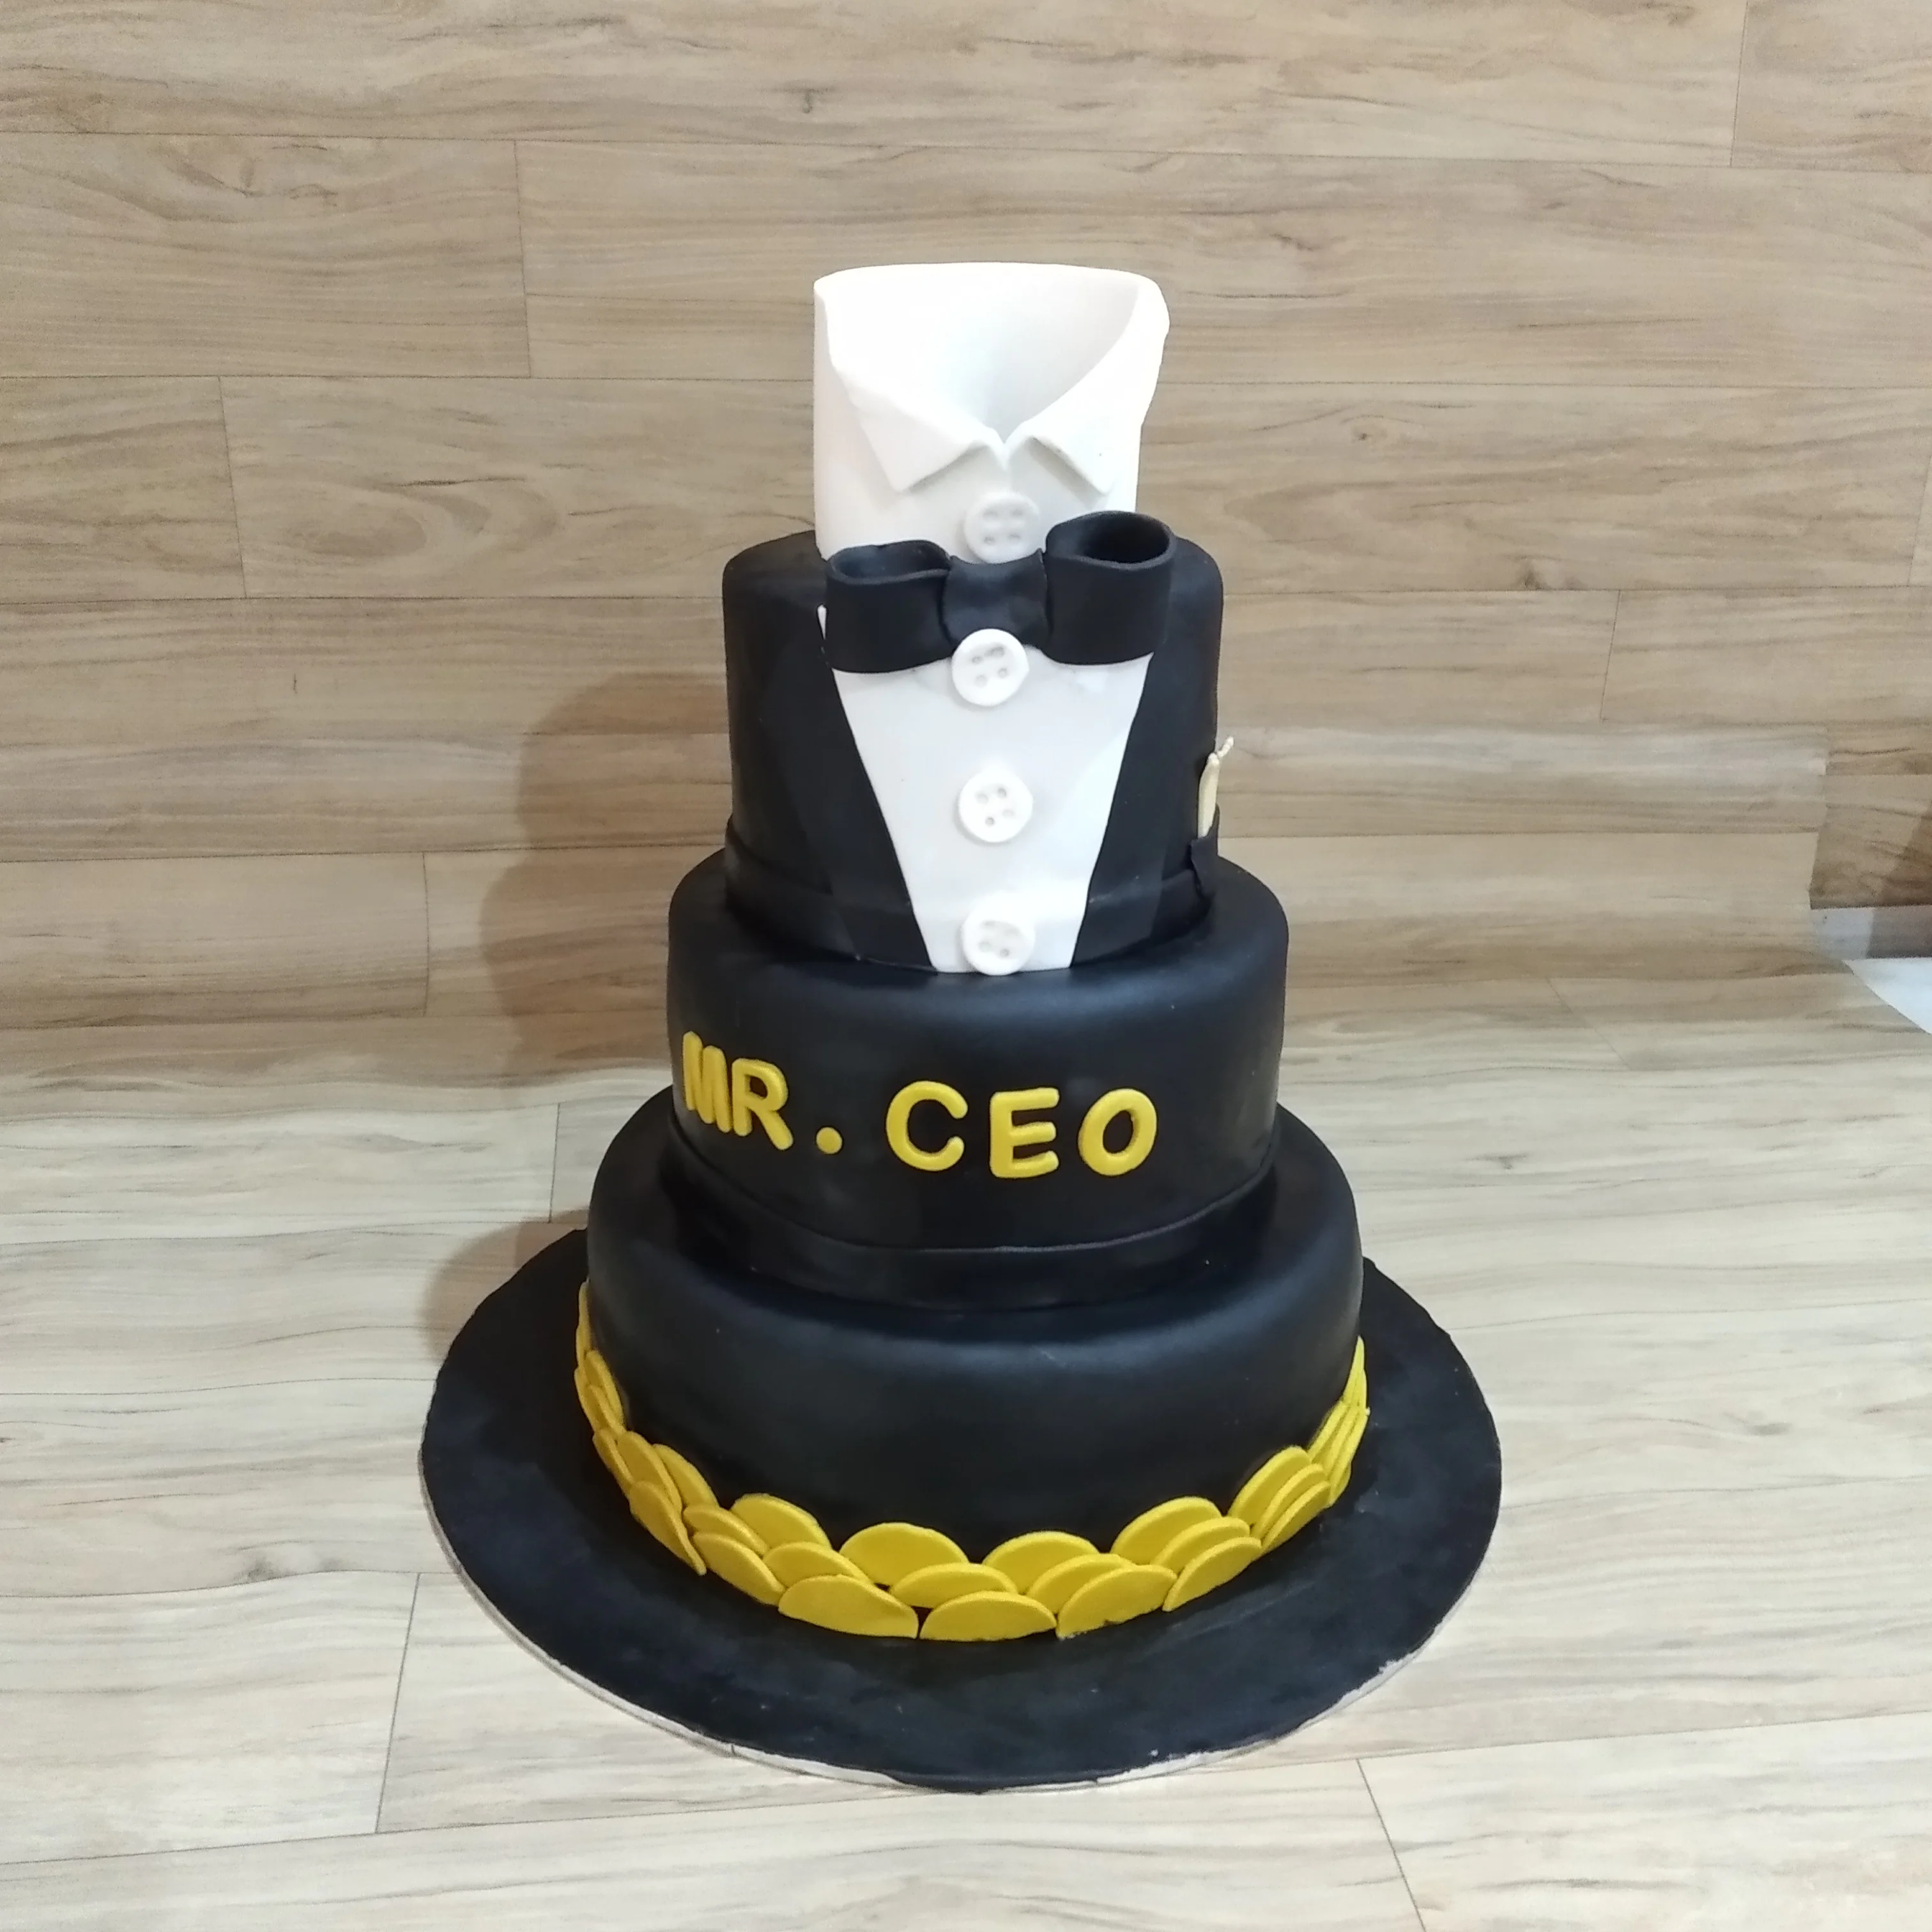 Gentleman CEO Birthday Cake Delivery in Delhi NCR - ₹8,699.00 Cake Express